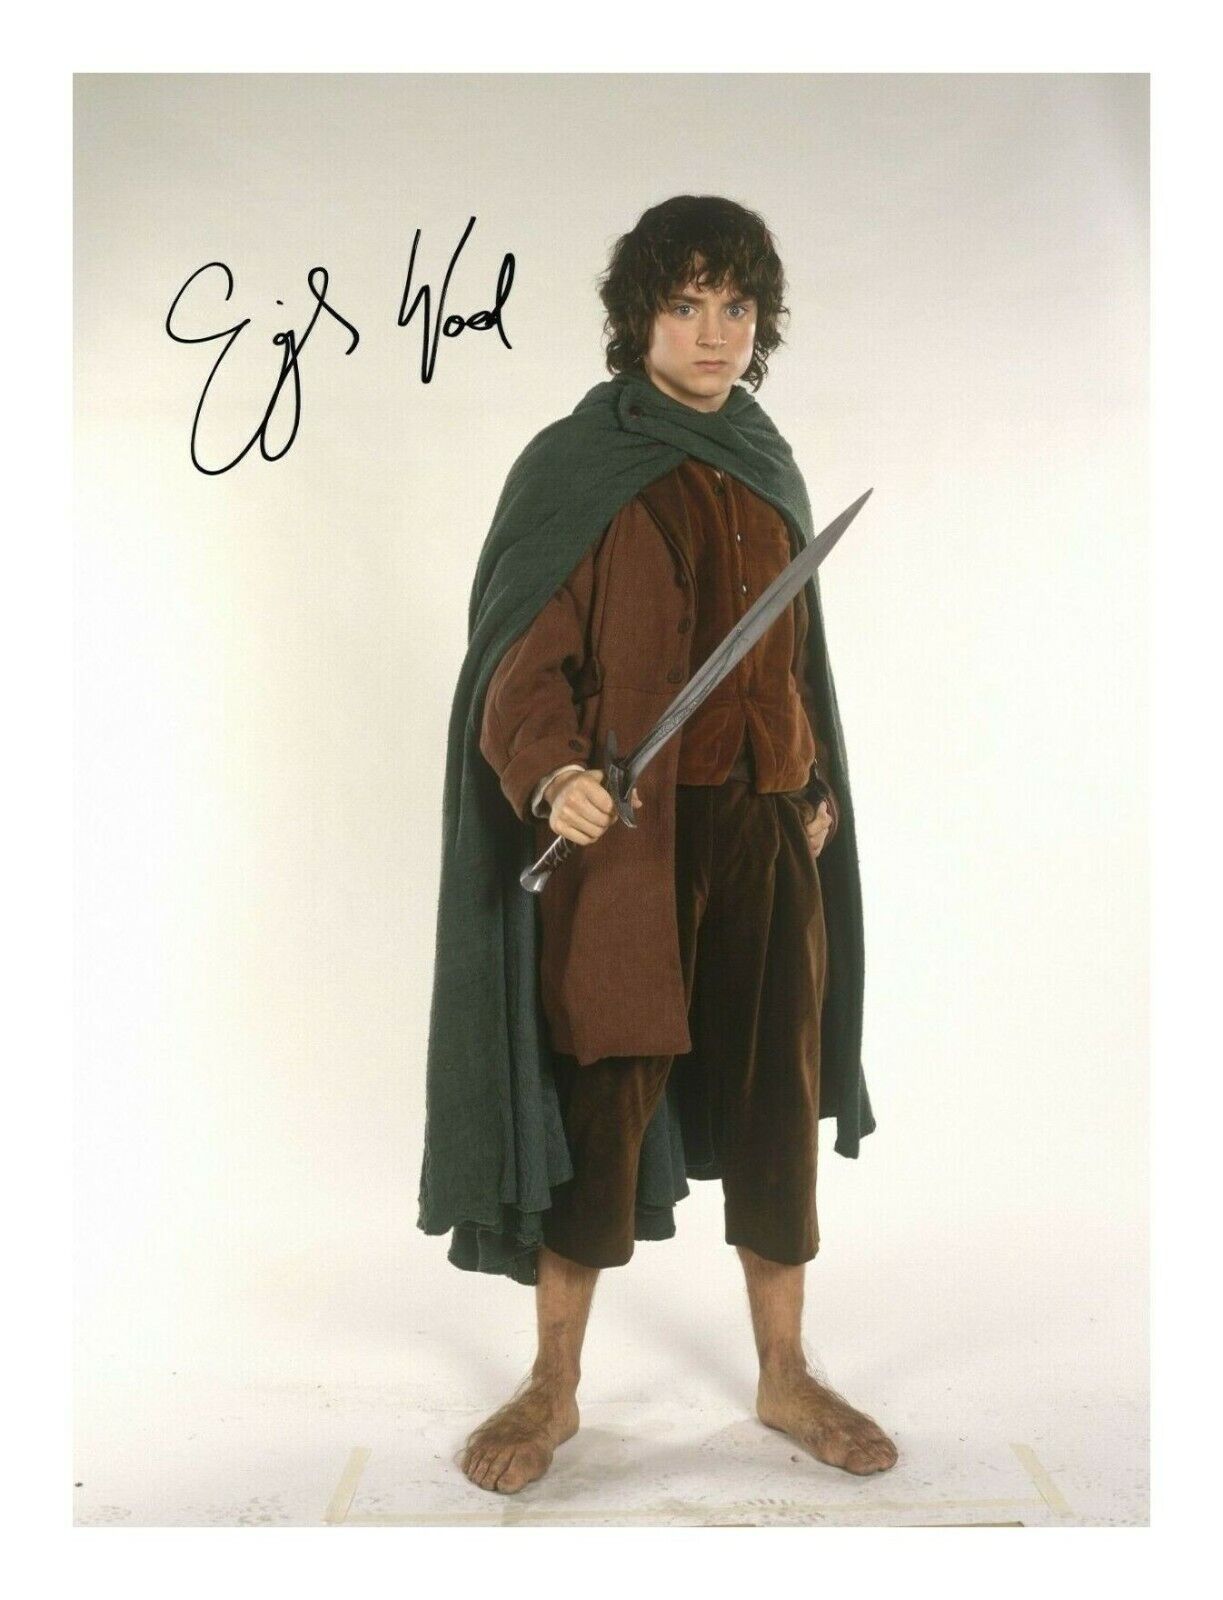 ELIJAH WOOD - LORD OF THE RINGS AUTOGRAPH SIGNED PP Photo Poster painting POSTER